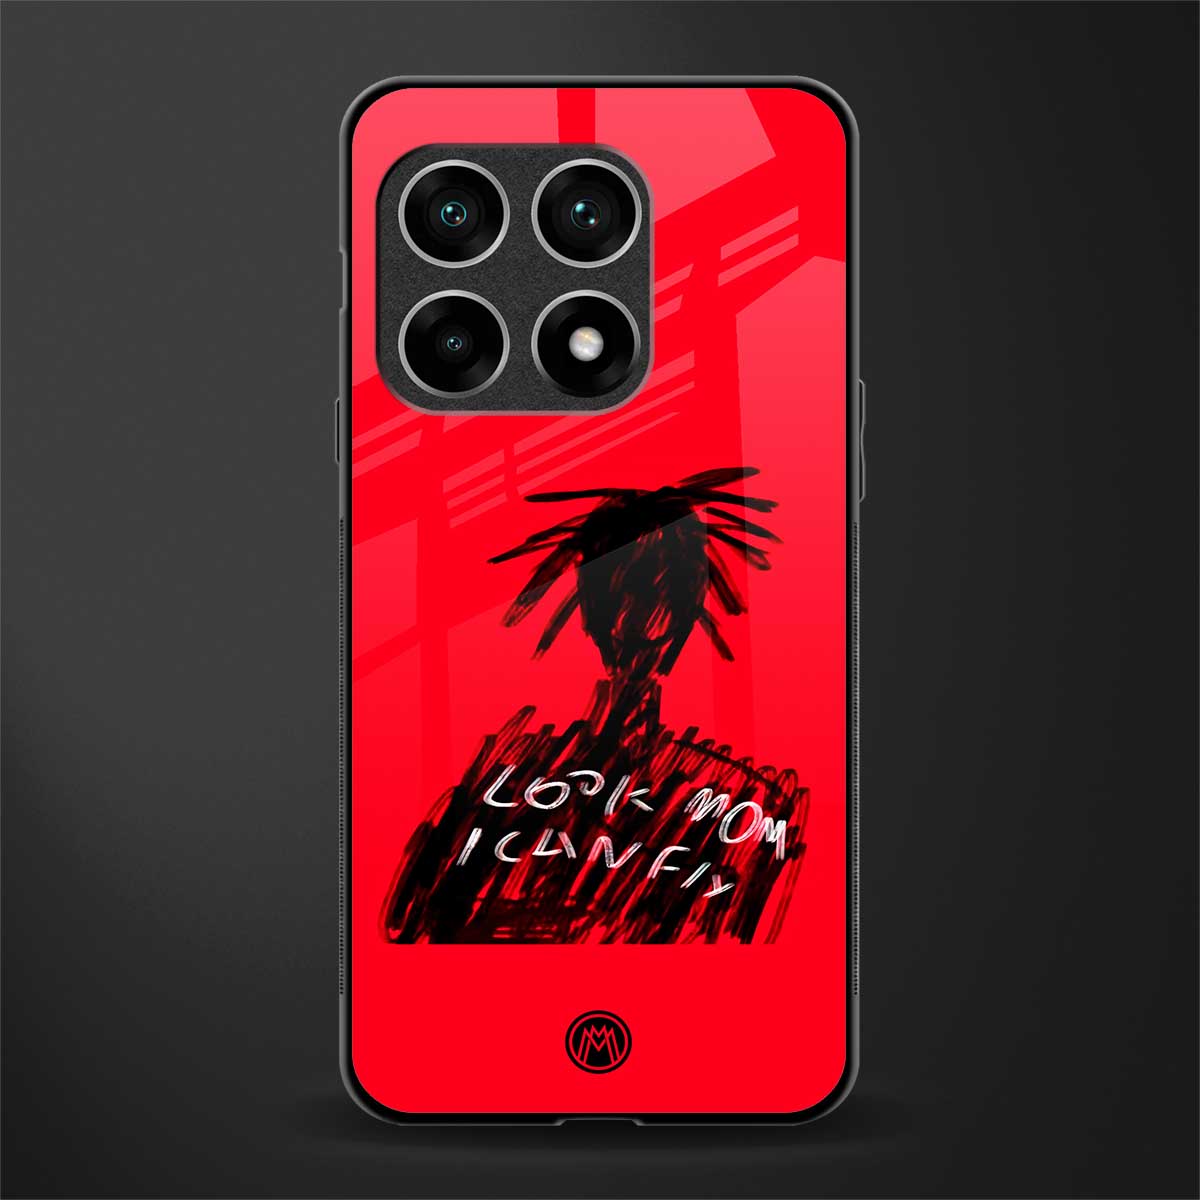 look mom i can fly glass case for oneplus 10 pro 5g image